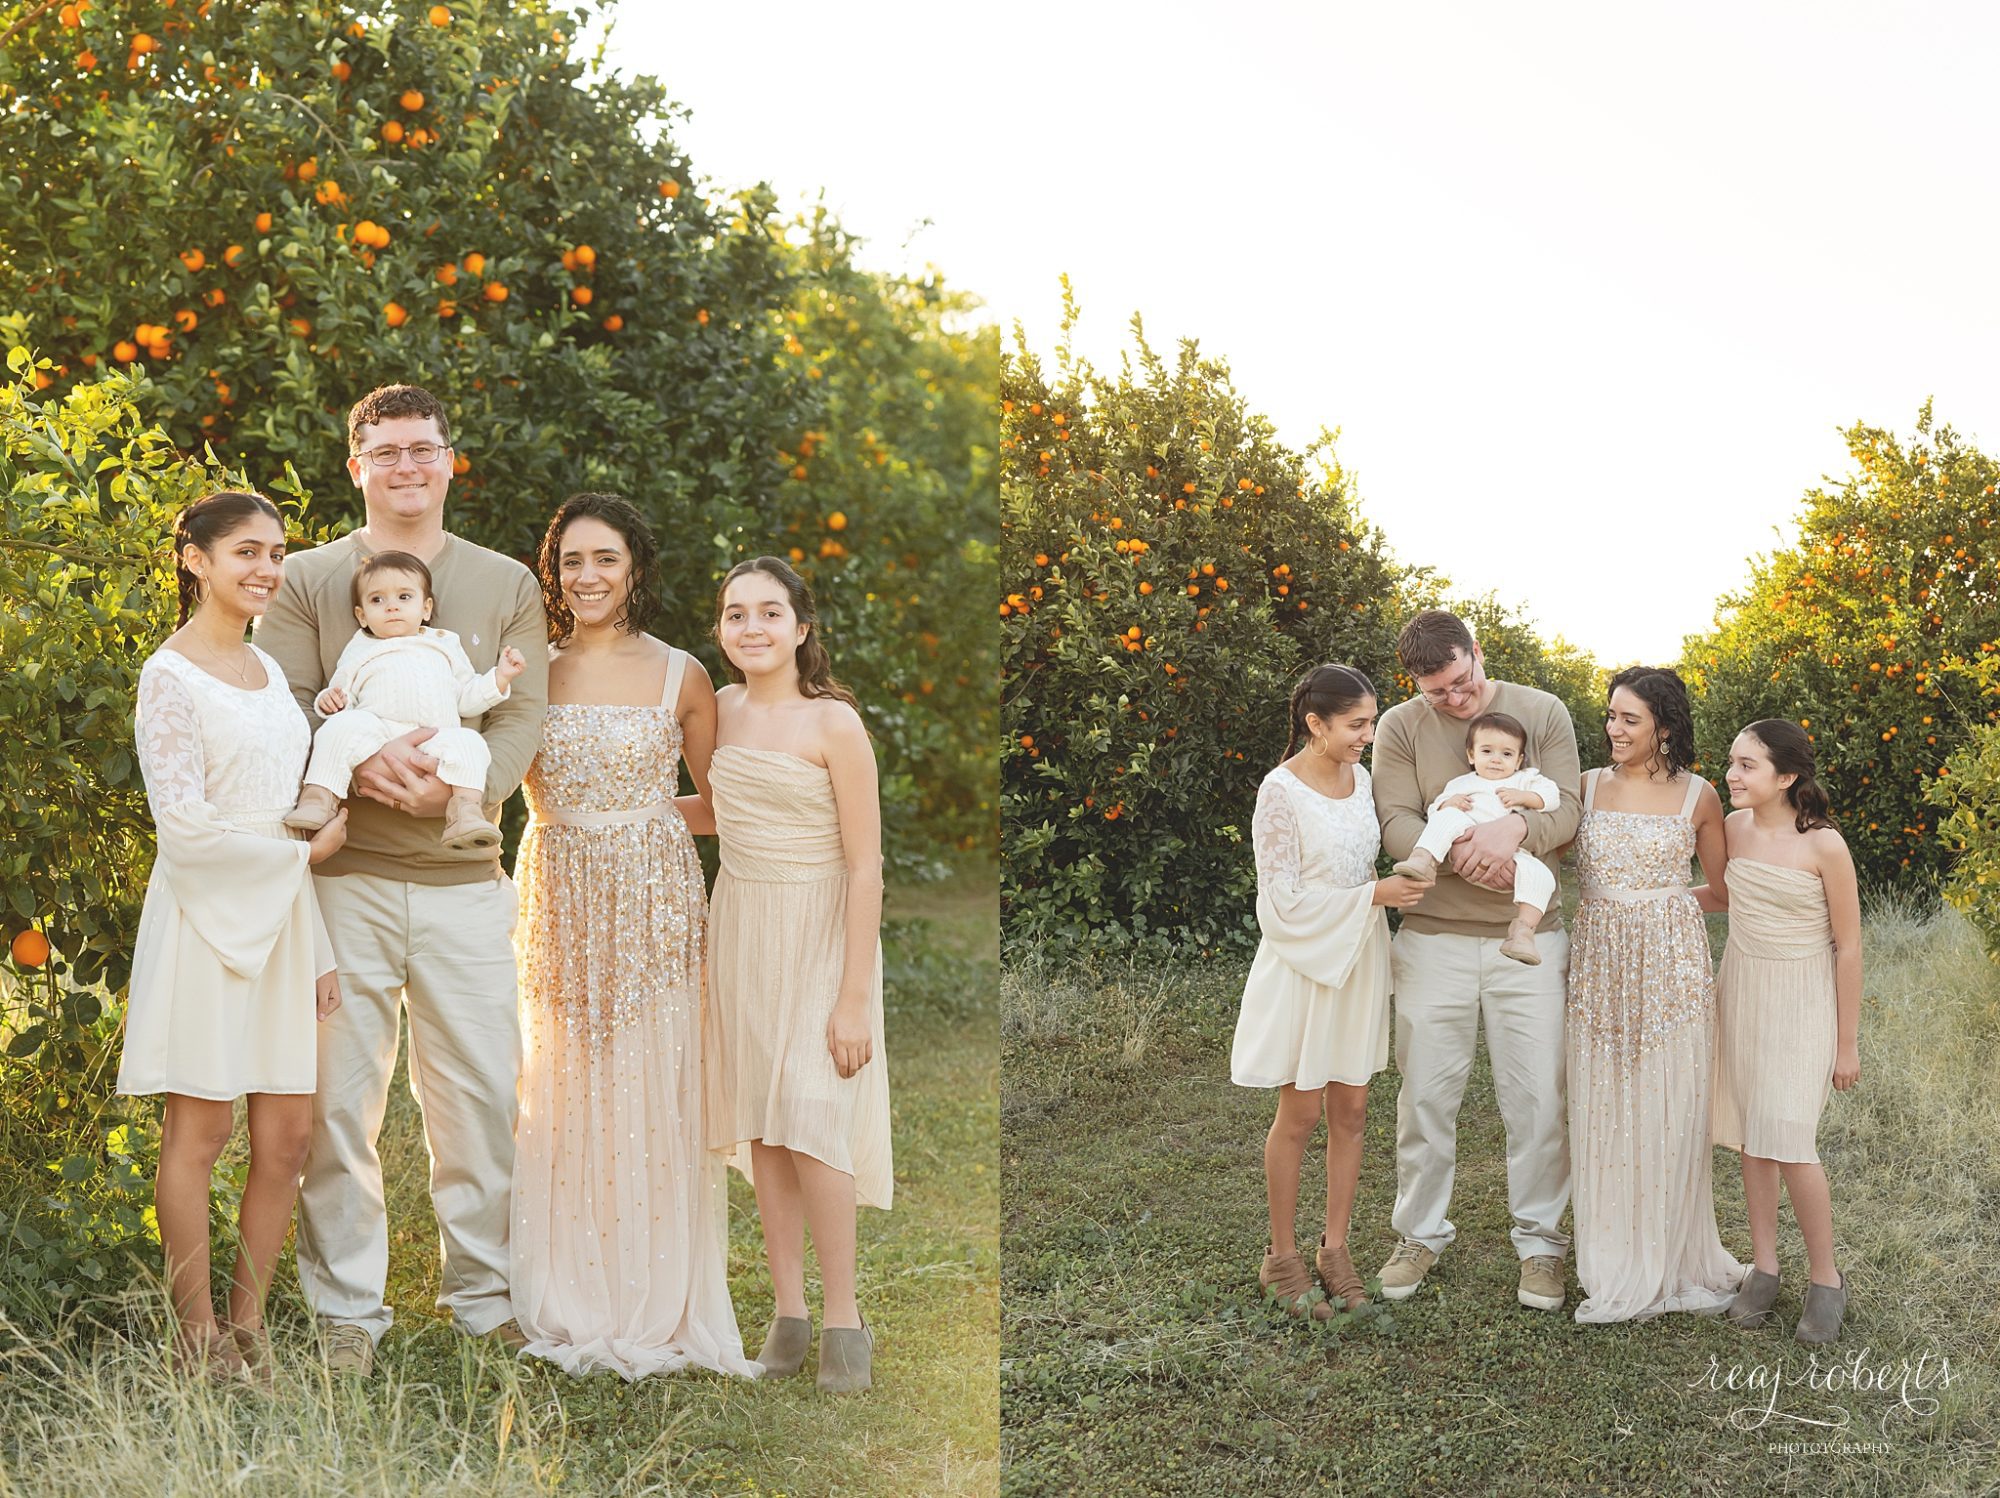 What to wear for your family photo session, neutrals, creams, tan, brown | Phoenix Family Photographer | Reaj Roberts Photography